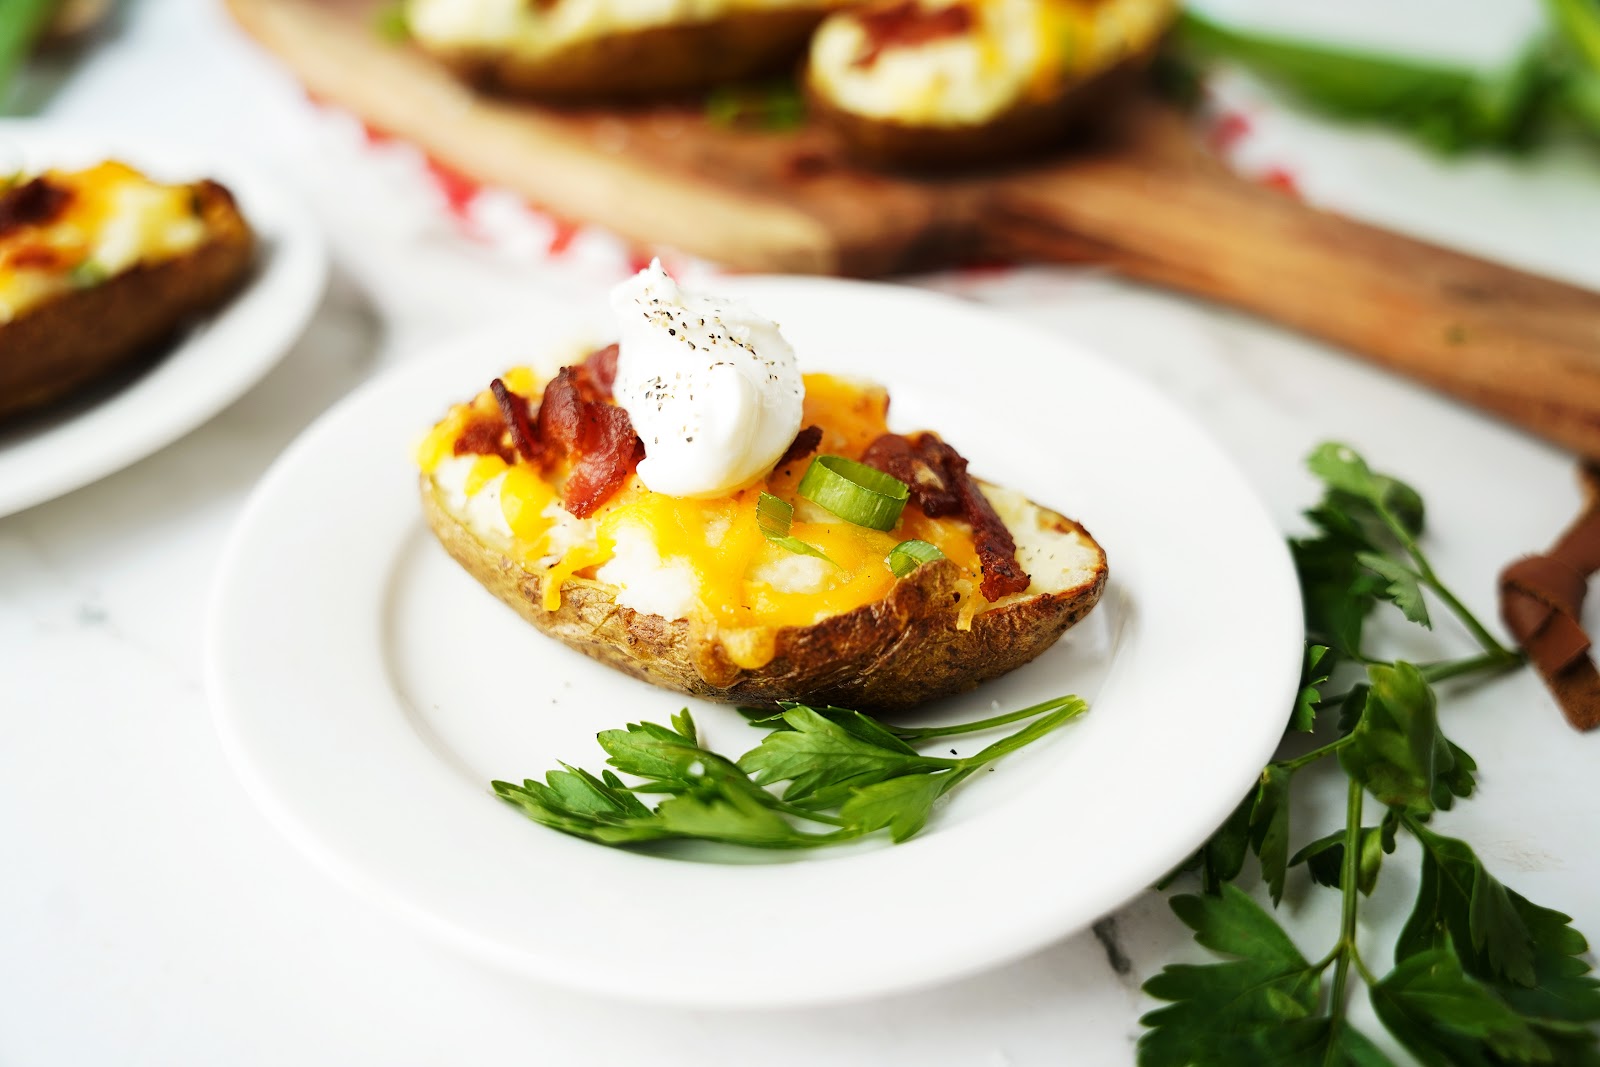 Twice baked potato on a plate with a cilantro garnish.